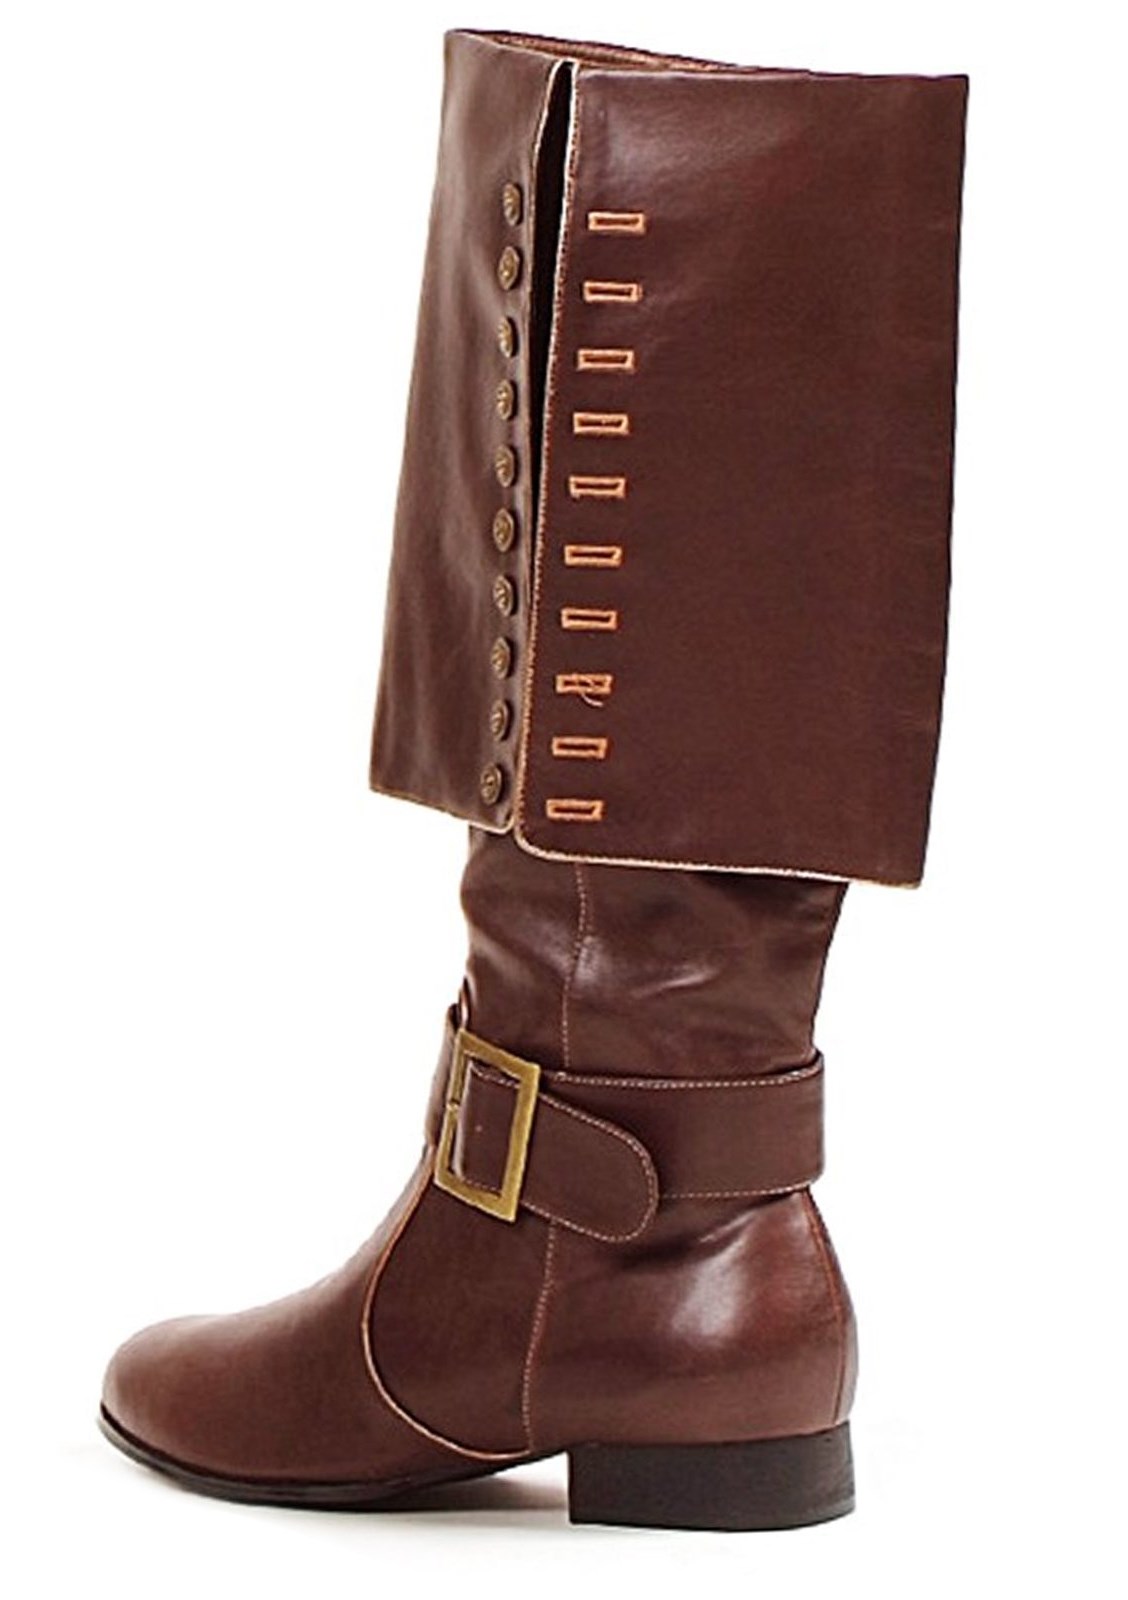 Captain Brown Adult Boots